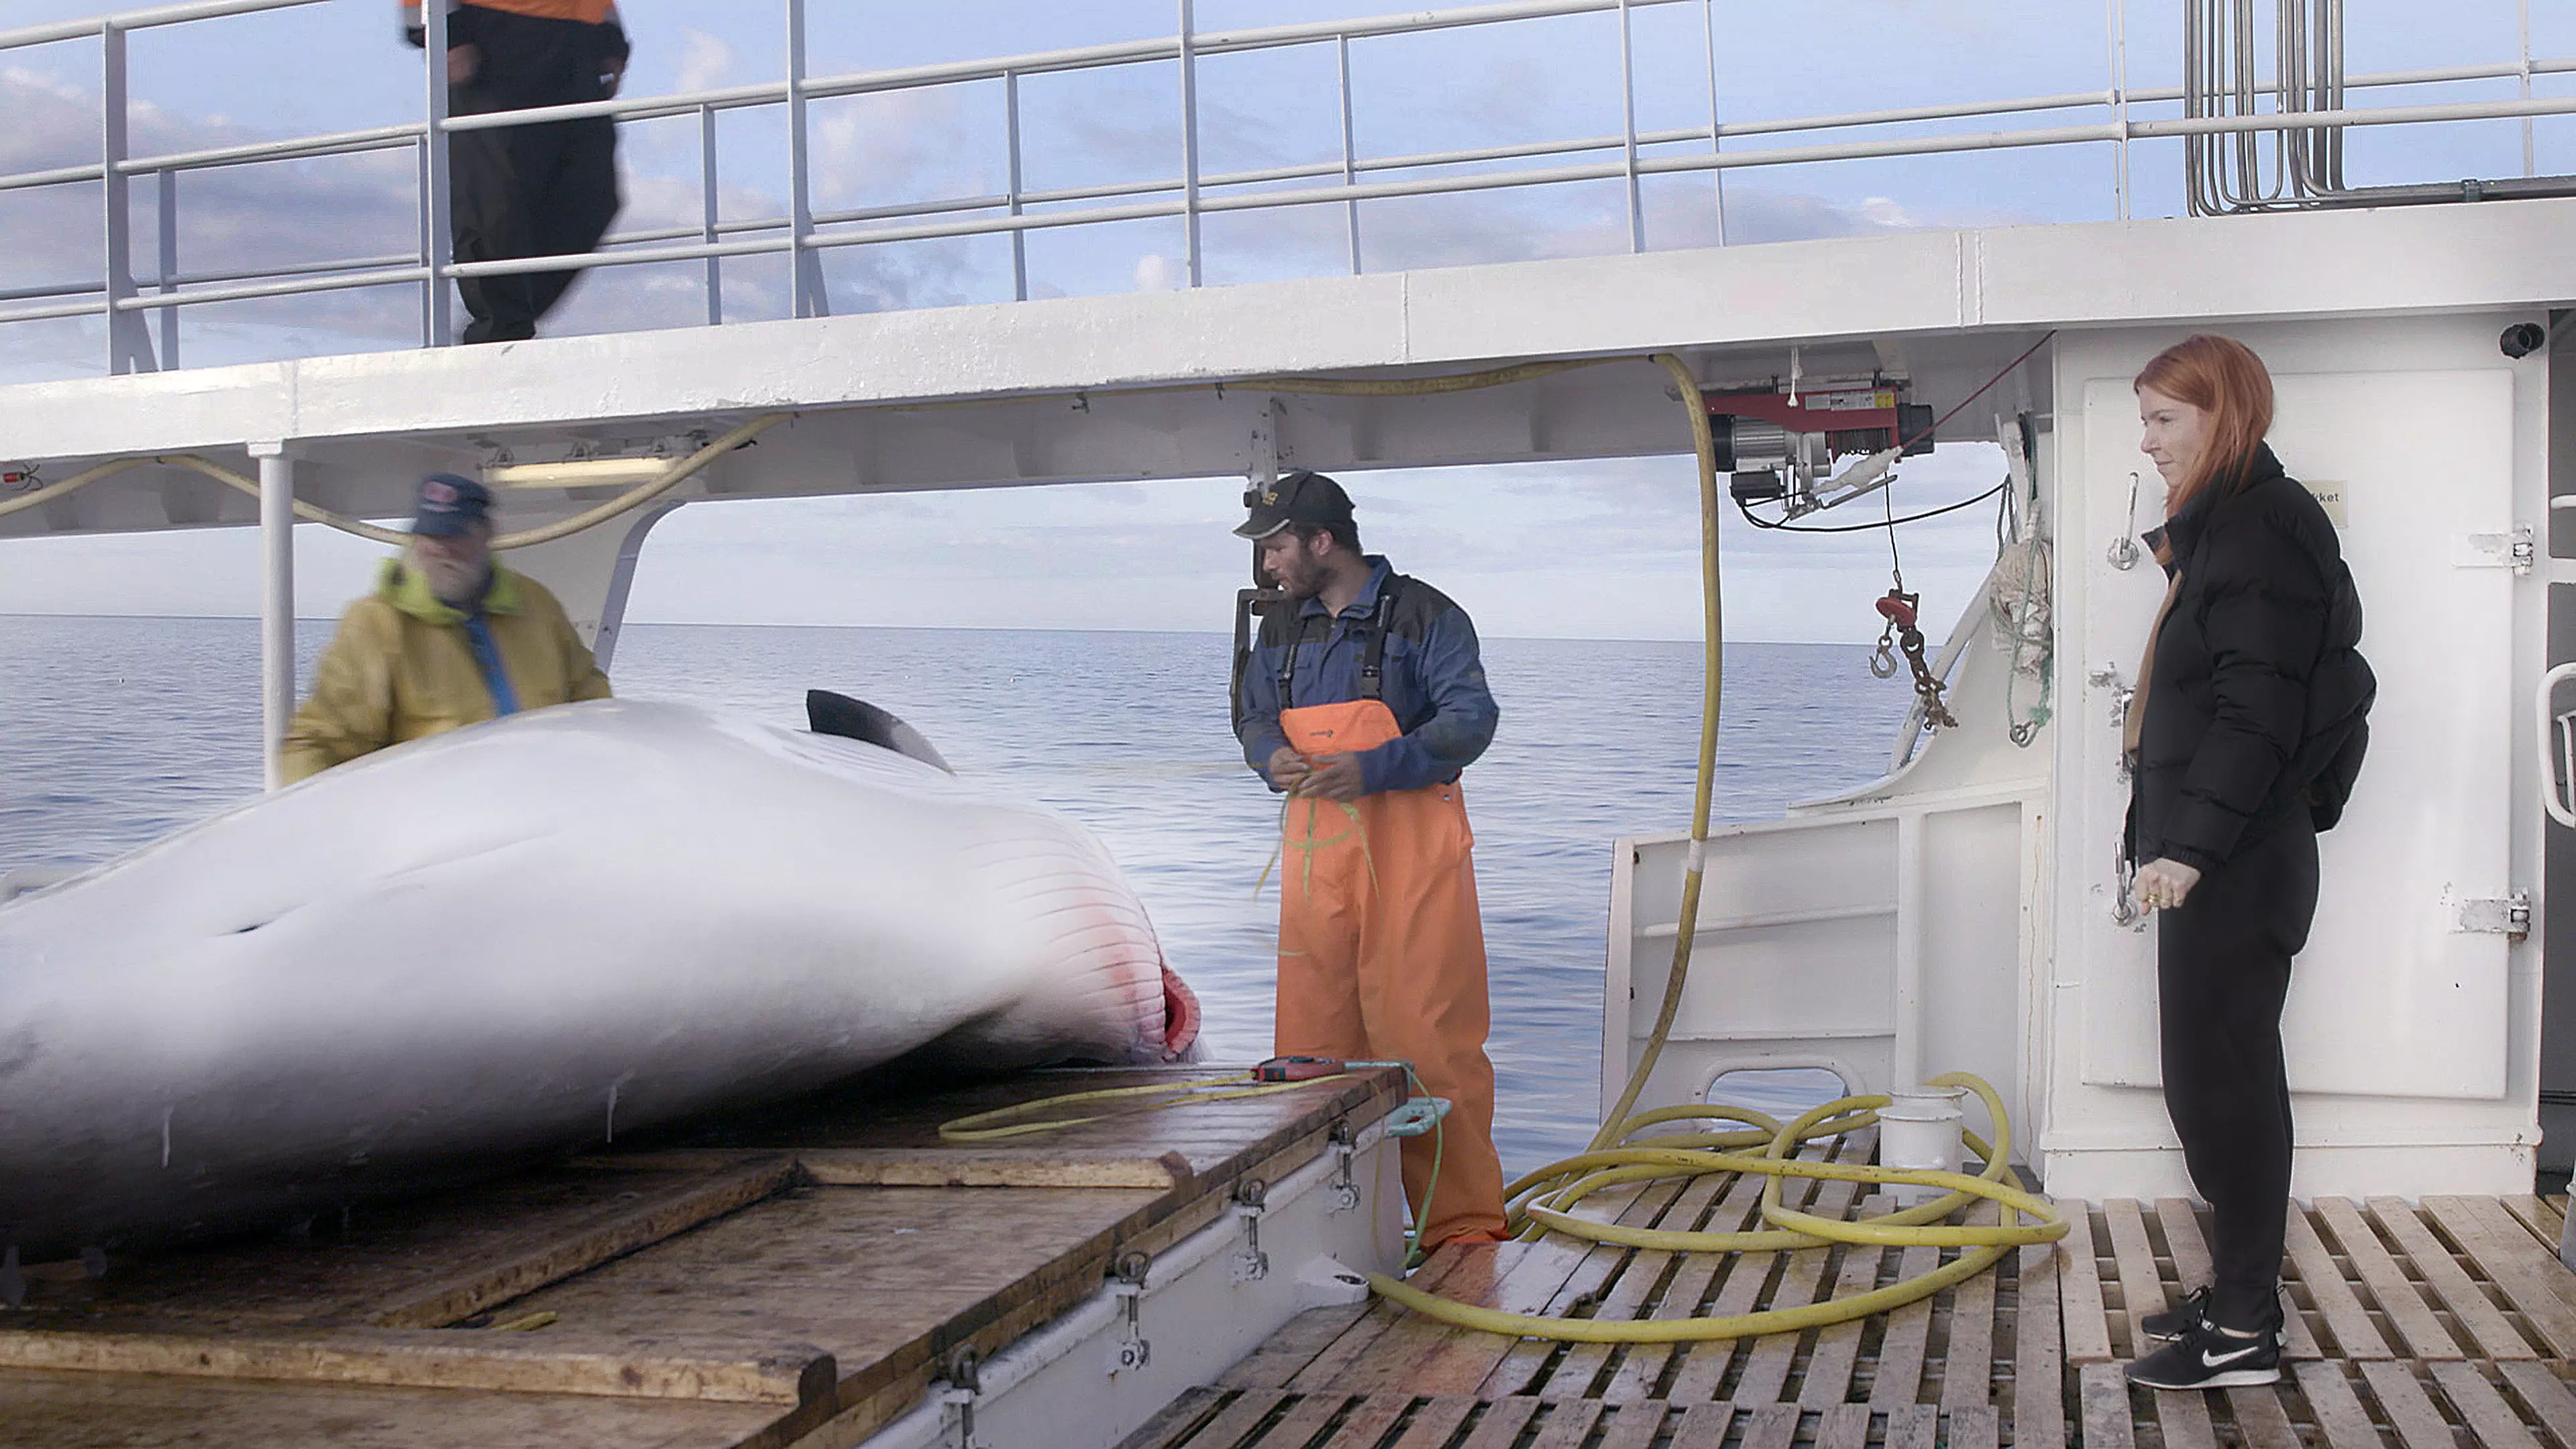 Stacey also catches a glimpse of commercial whaling in Norway (